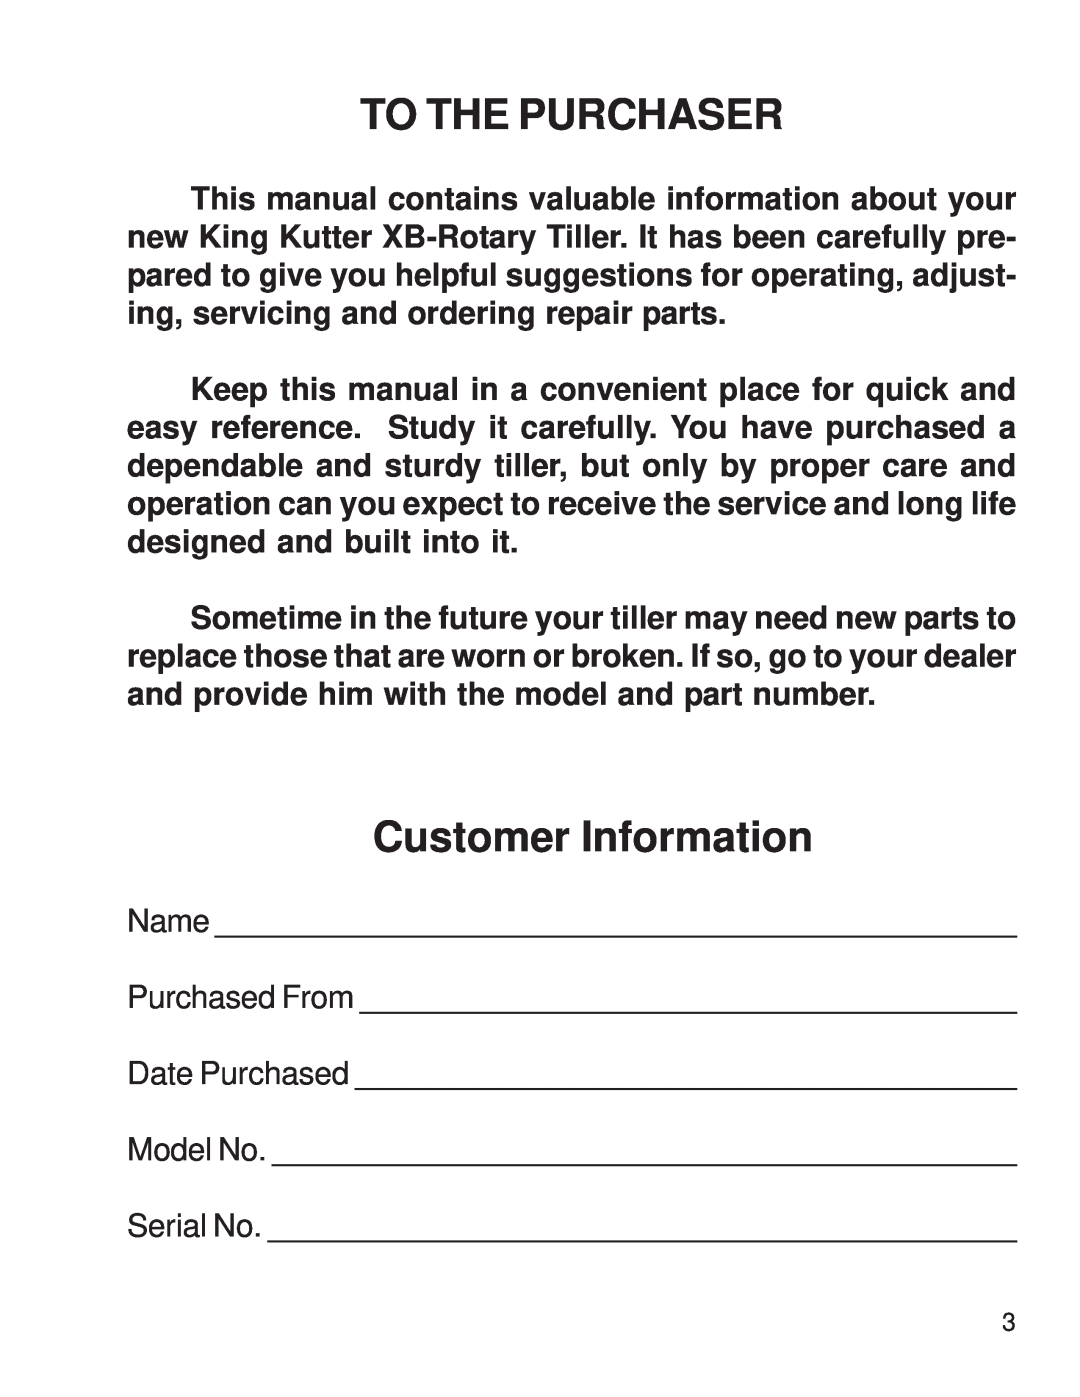 King Kutter 999995 manual To The Purchaser, Customer Information 